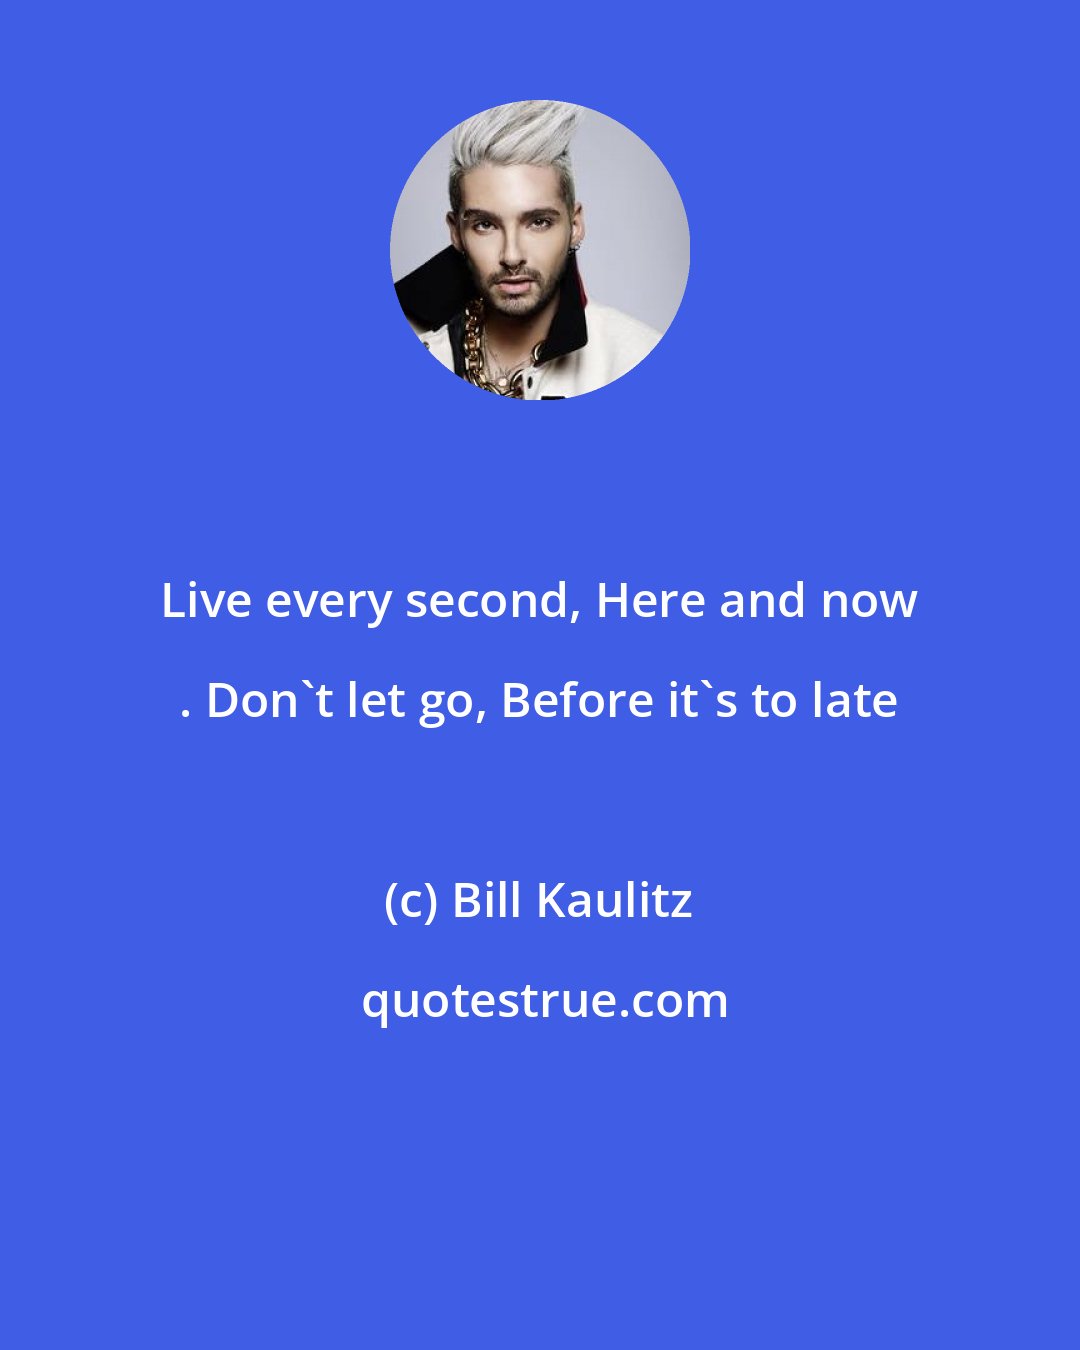 Bill Kaulitz: Live every second, Here and now . Don't let go, Before it's to late